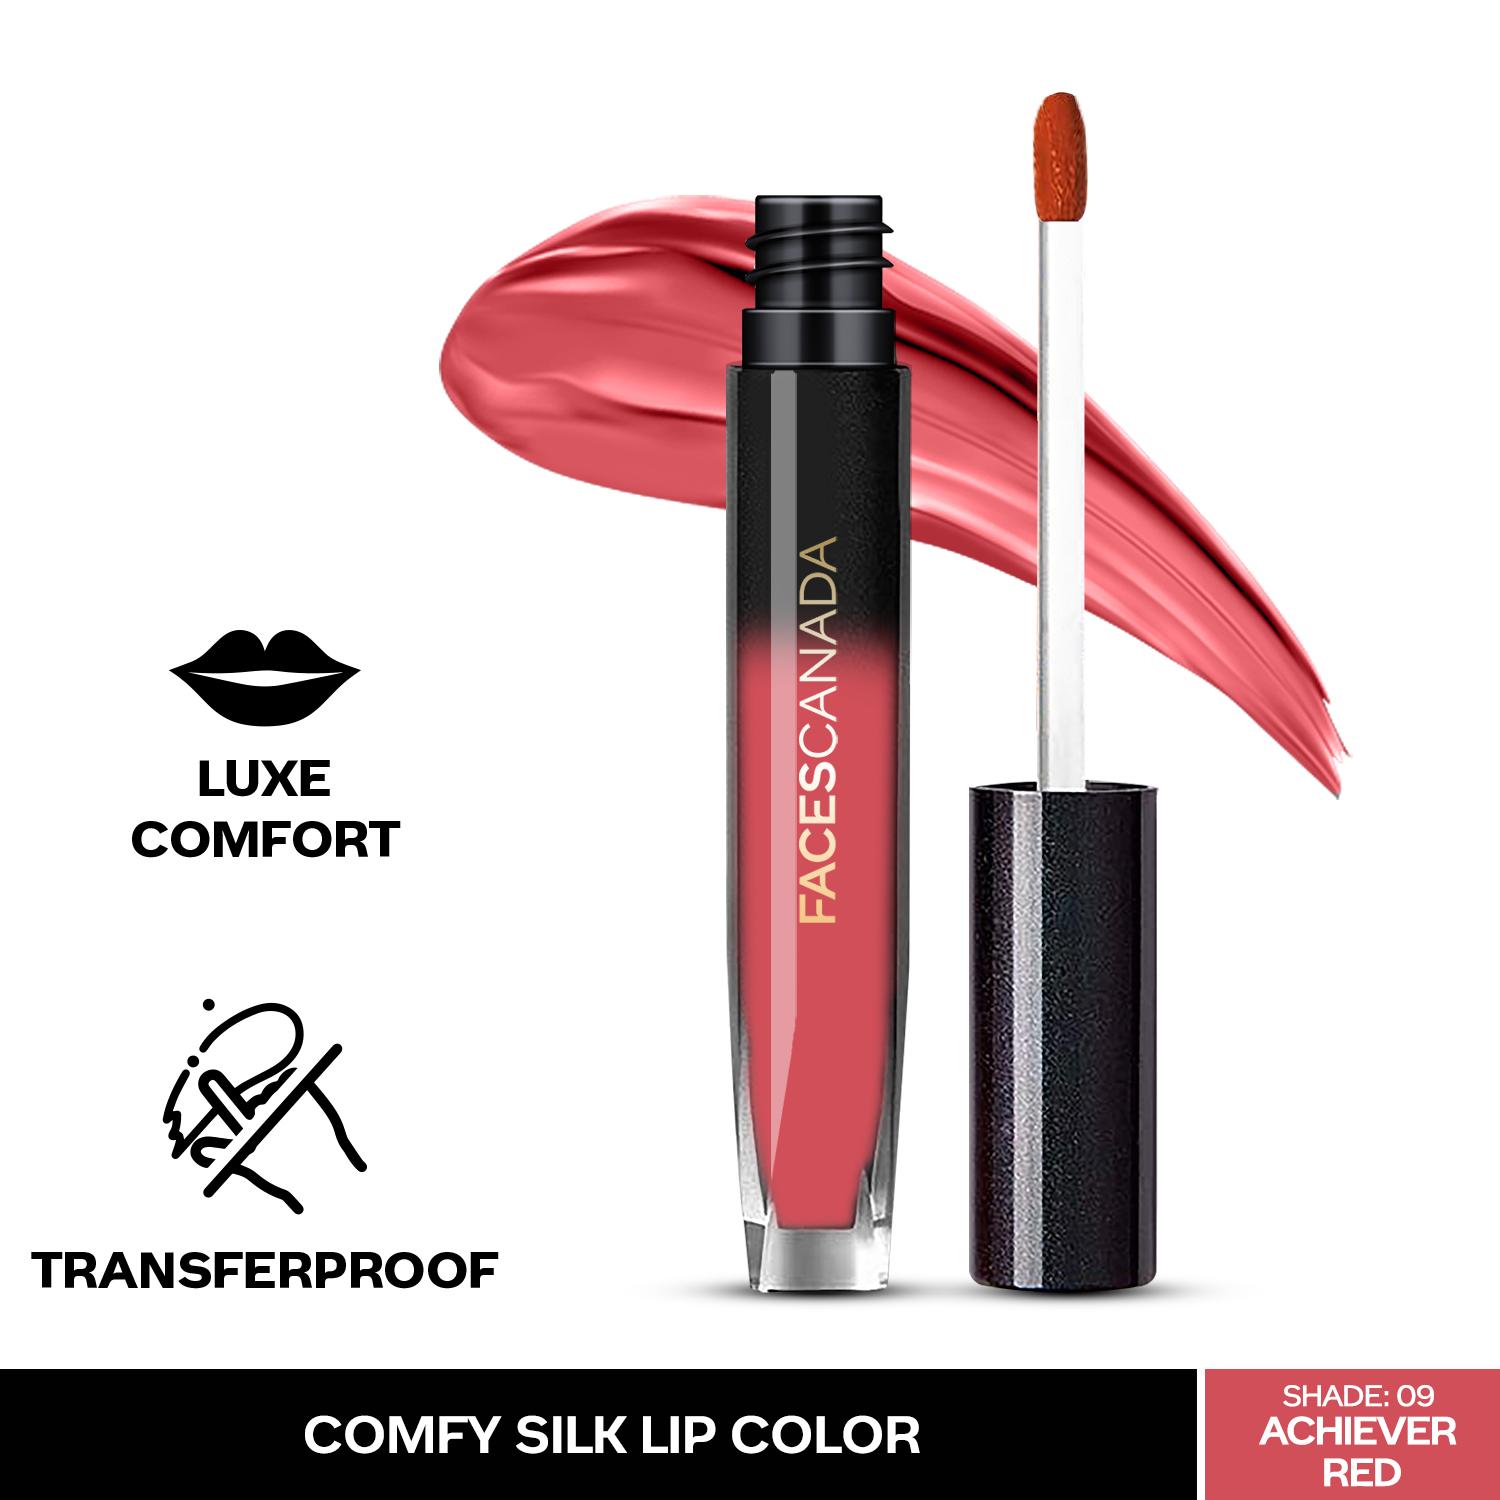 Faces Canada | Faces Canada Comfy Silk Lip Color I Mulberry Oil, Luxe Comfort, No Dryness I Achiever Red 09 (3 ml)